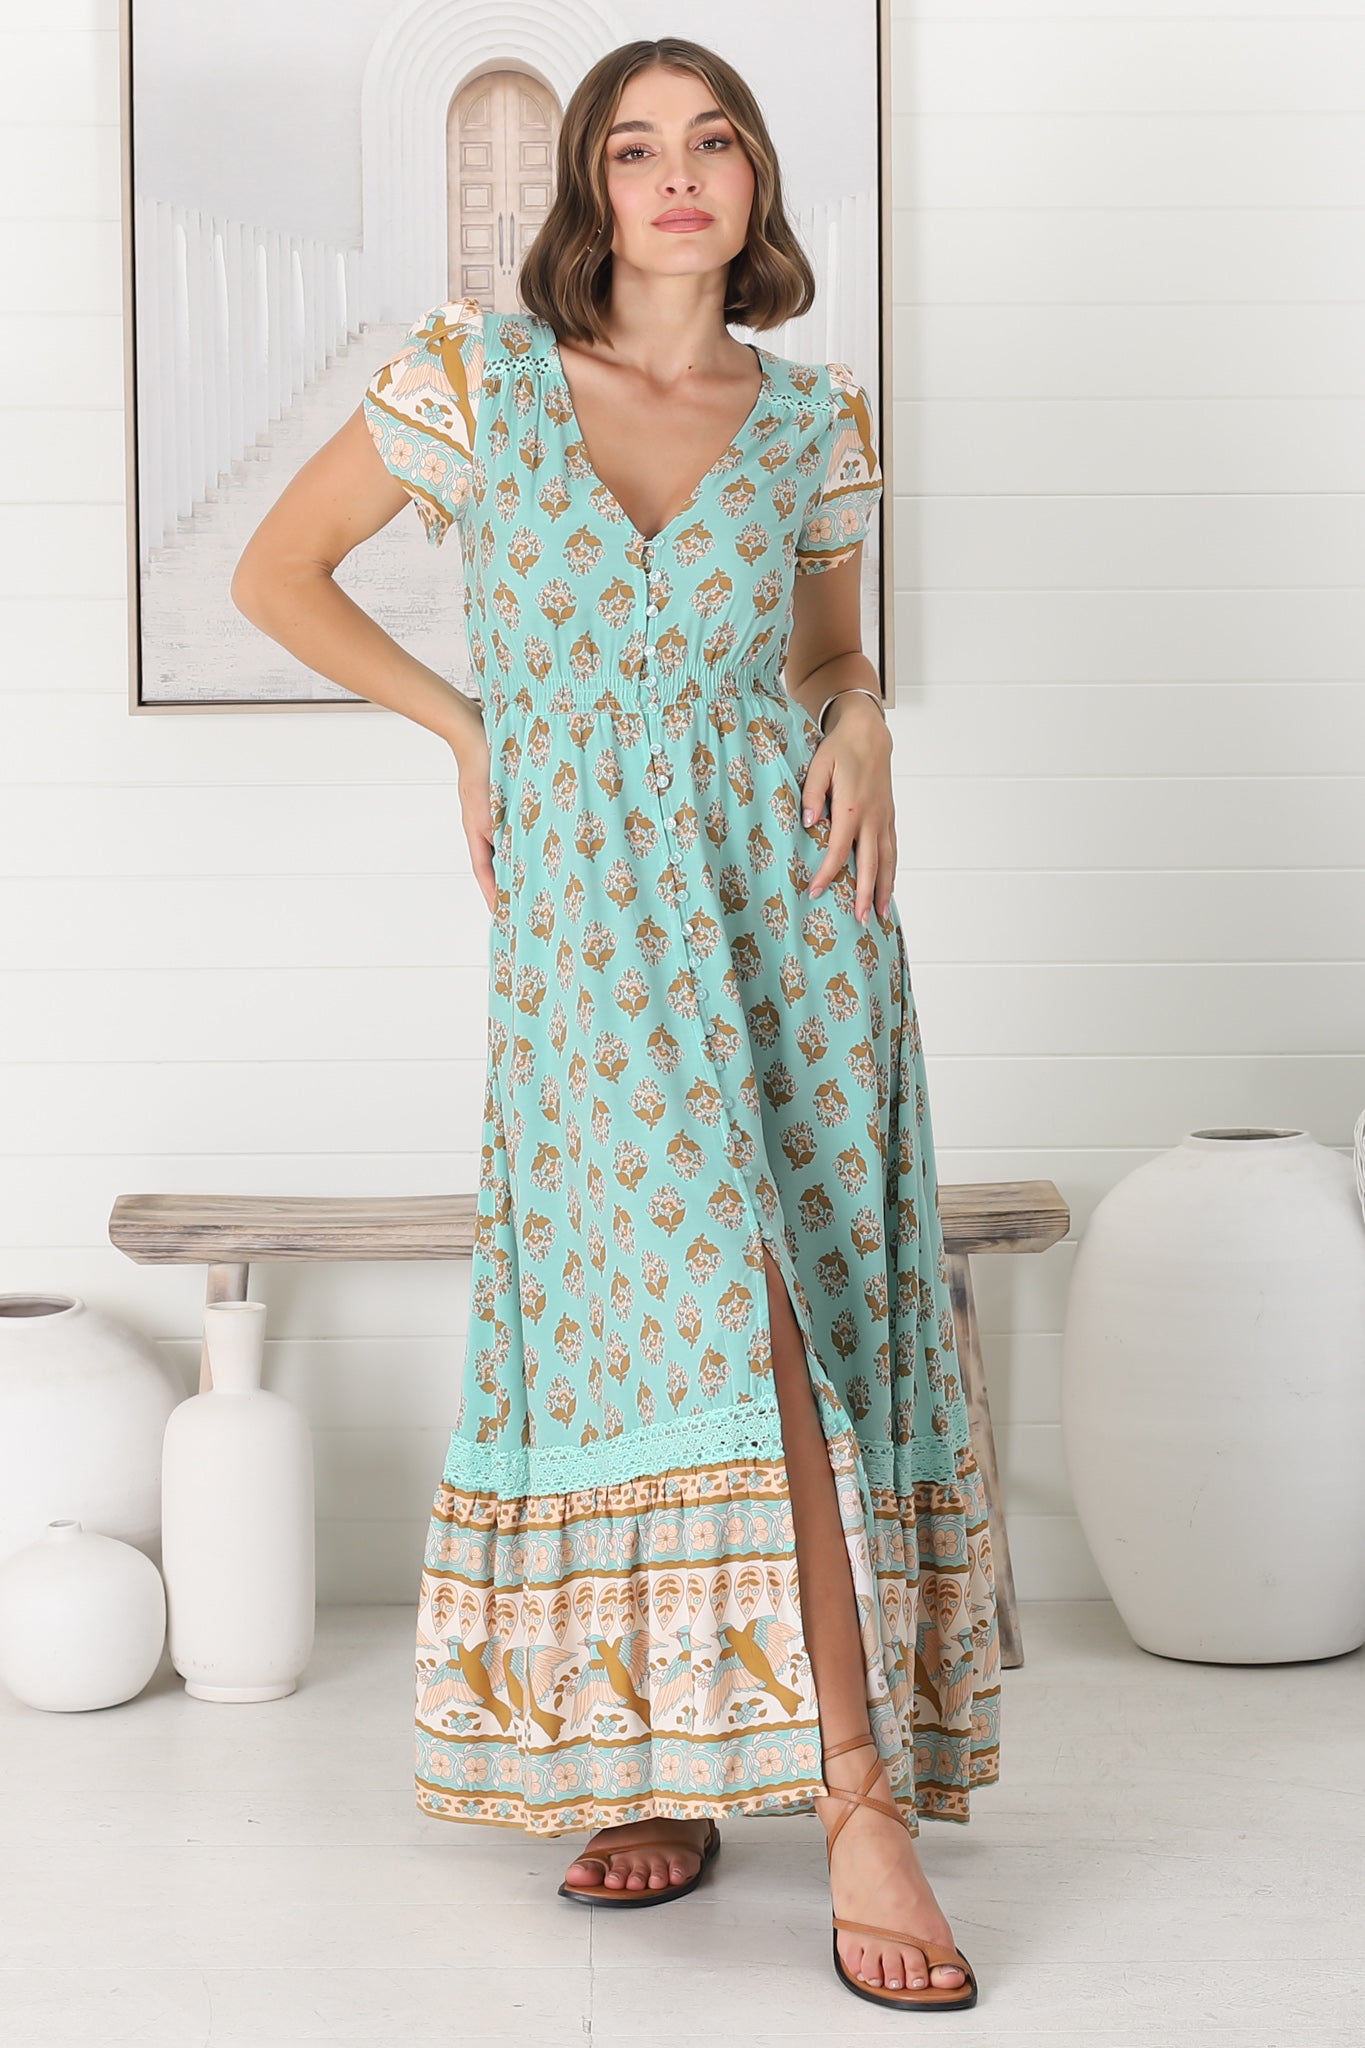 JAASE - Carmen Maxi Dress: Butterfly Cap Sleeve Button Down A Line Dress with Lace Trim in Aquarius Print